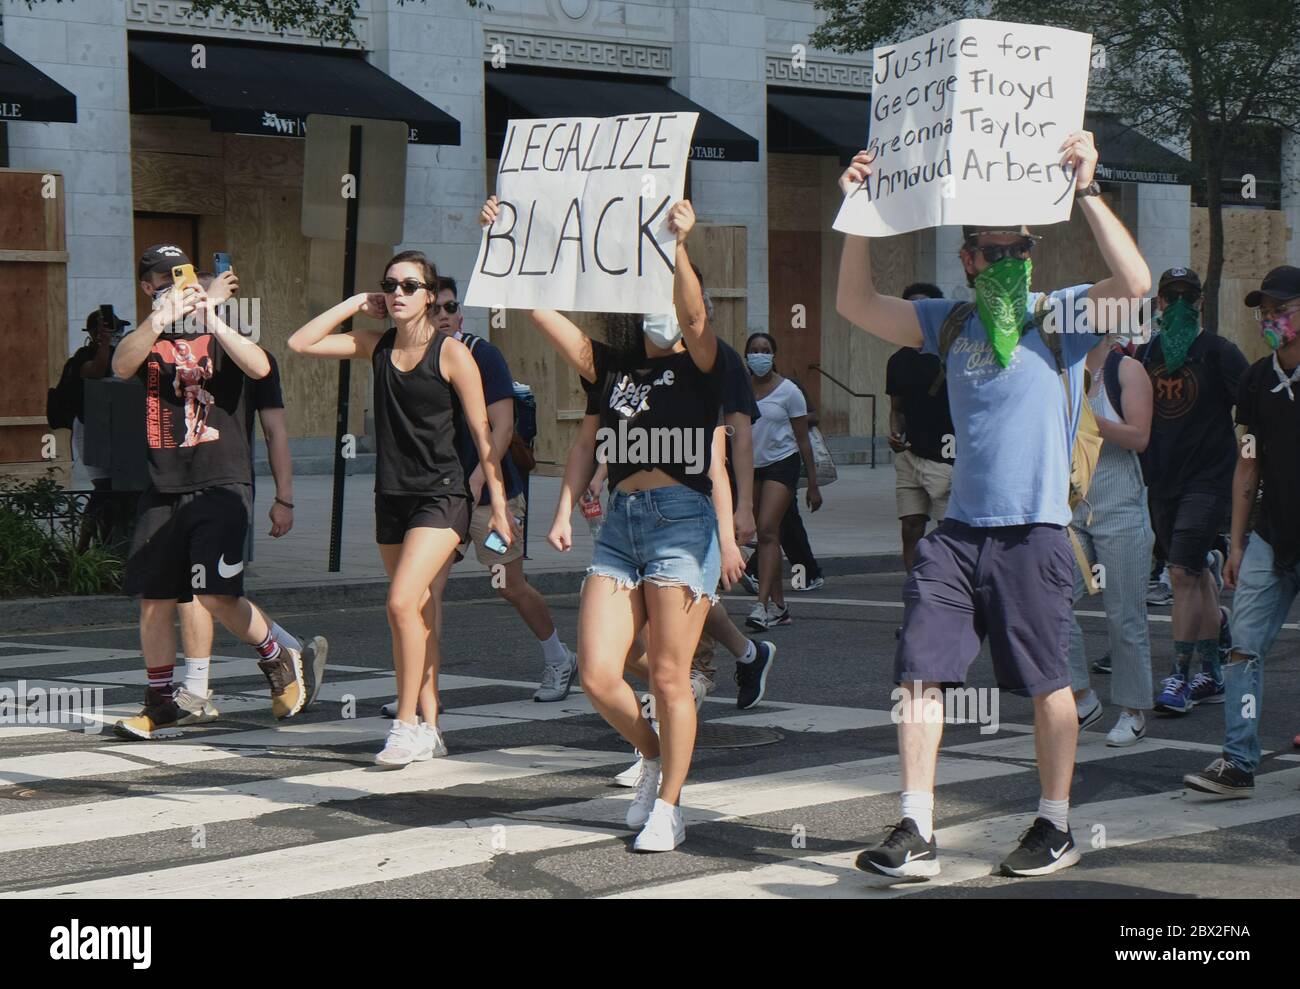 Protesters protest the death of George Floyd in Washington, D.C. blocks from The White House. Stock Photo